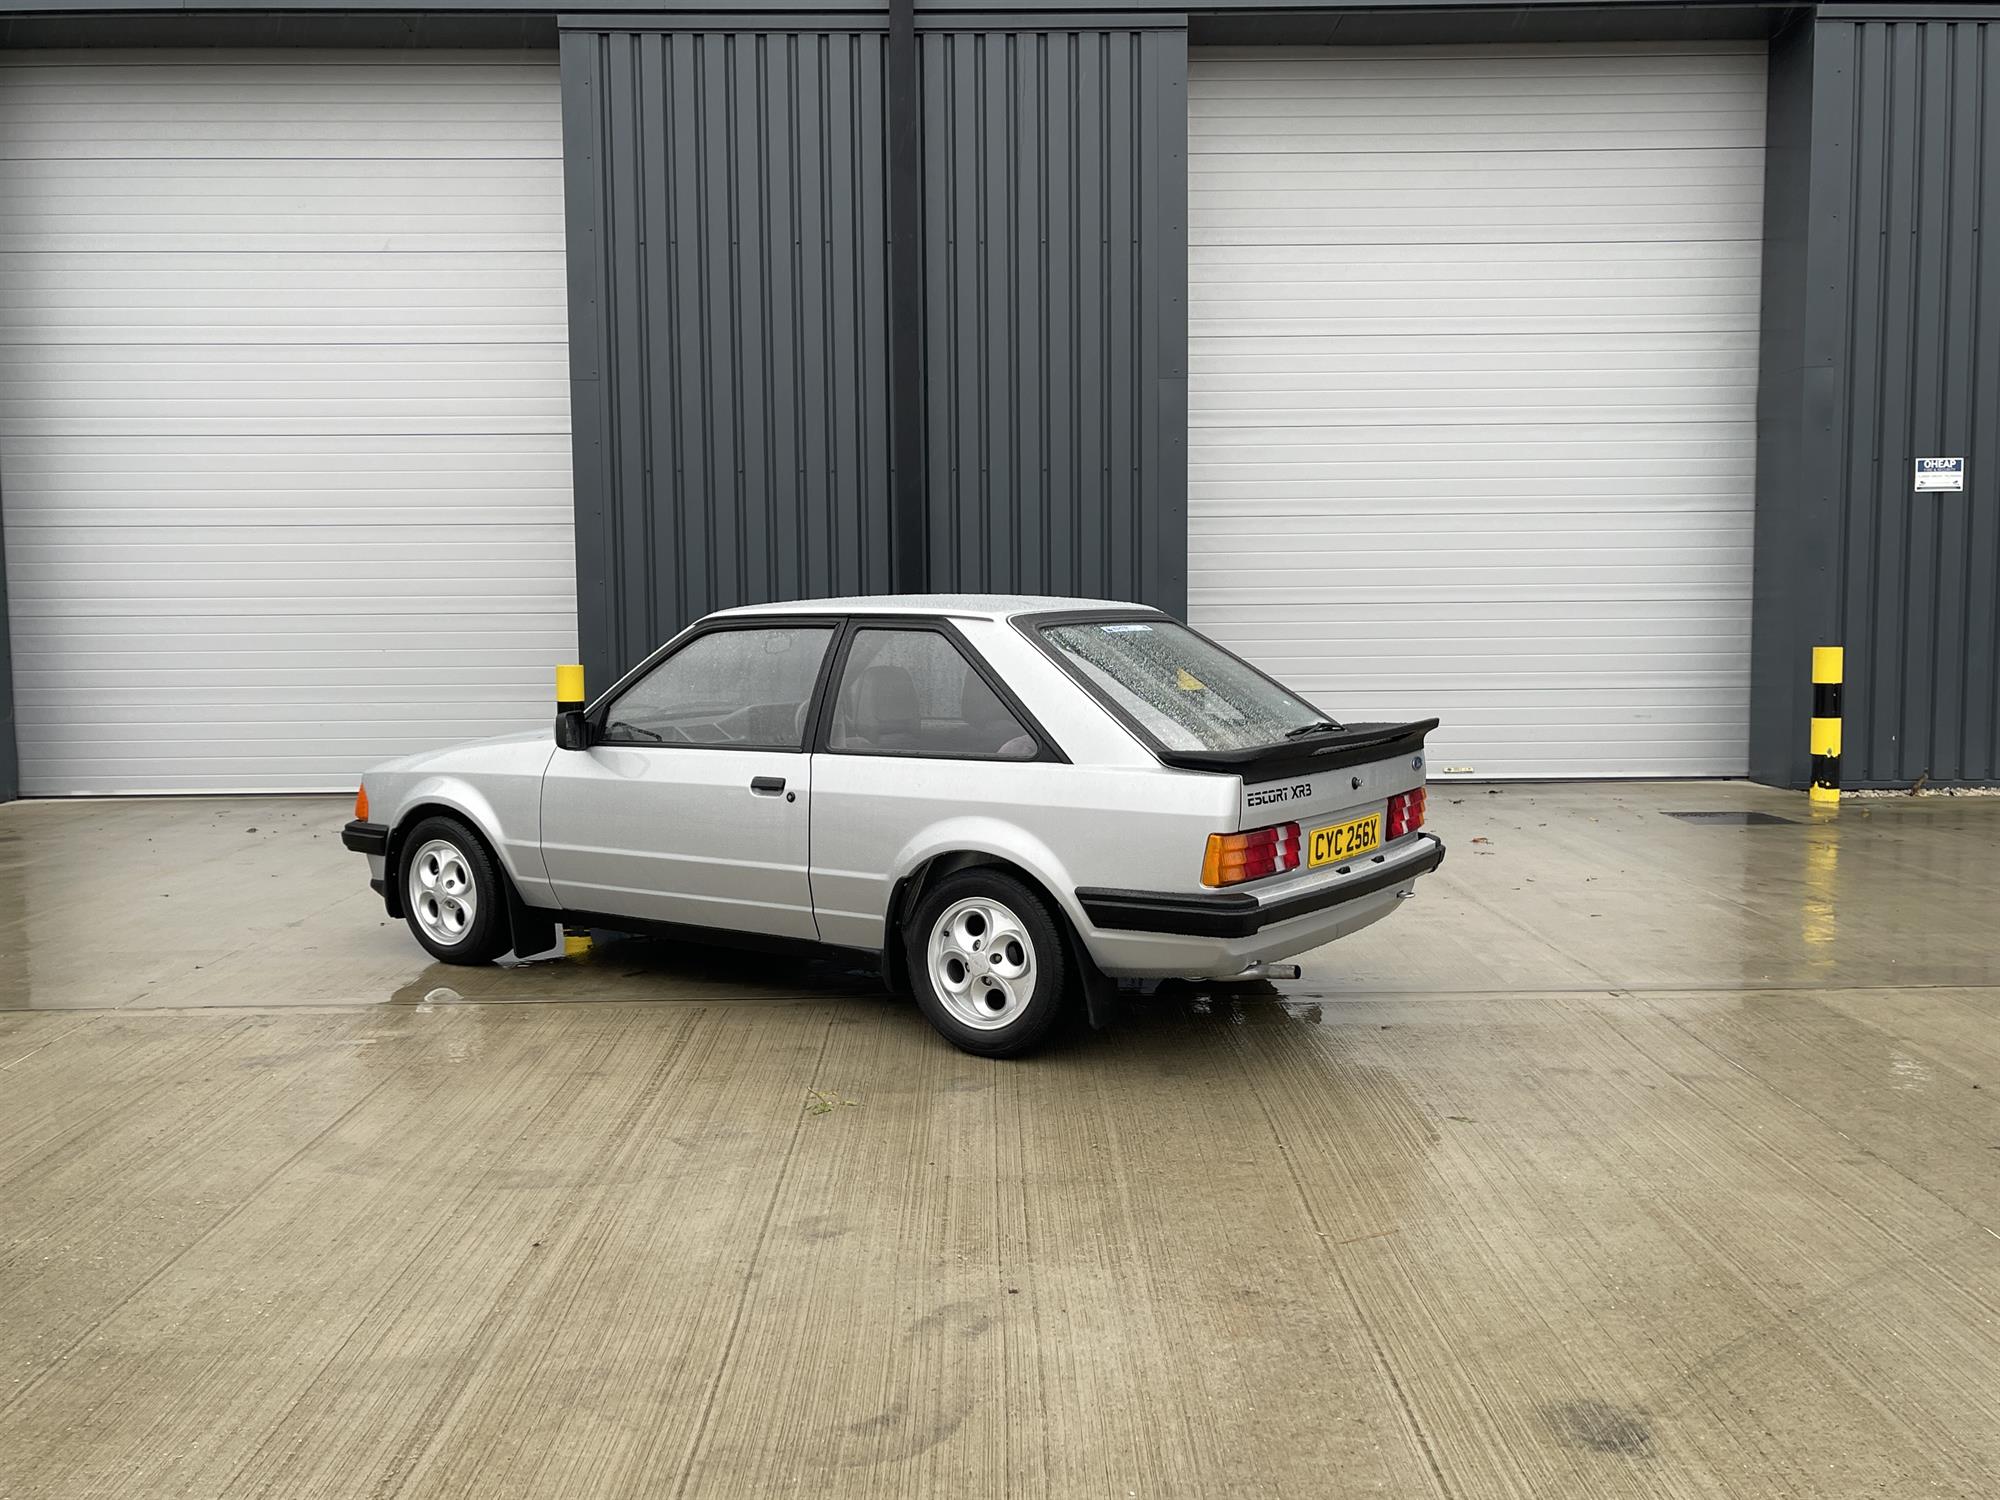 1982 Ford Escort XR3 - Image 5 of 10